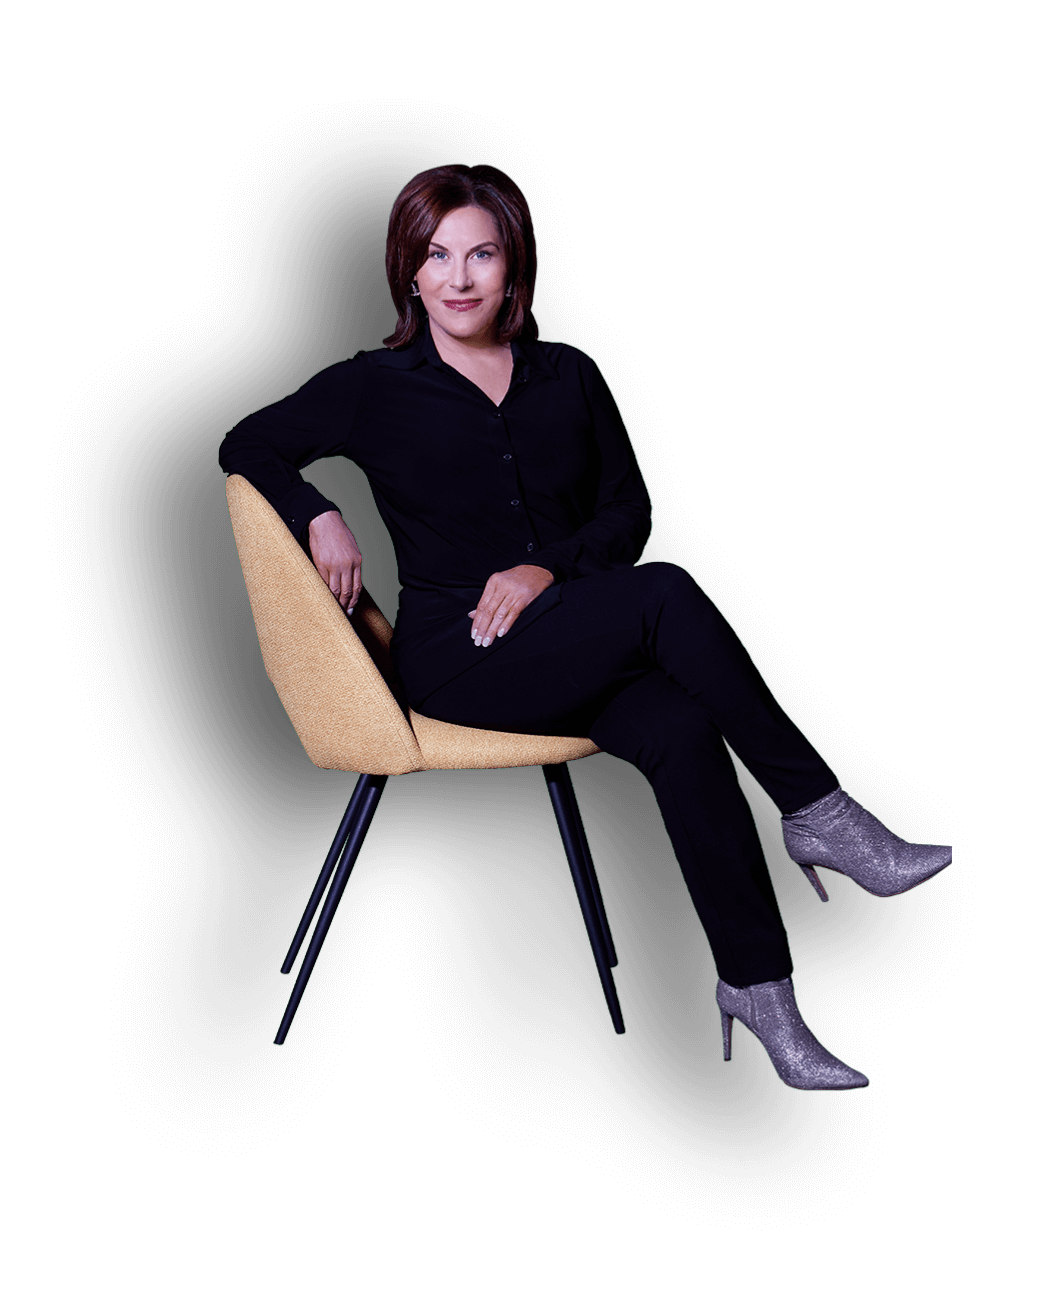 Daphne Michaels Sitting On A Chair Image